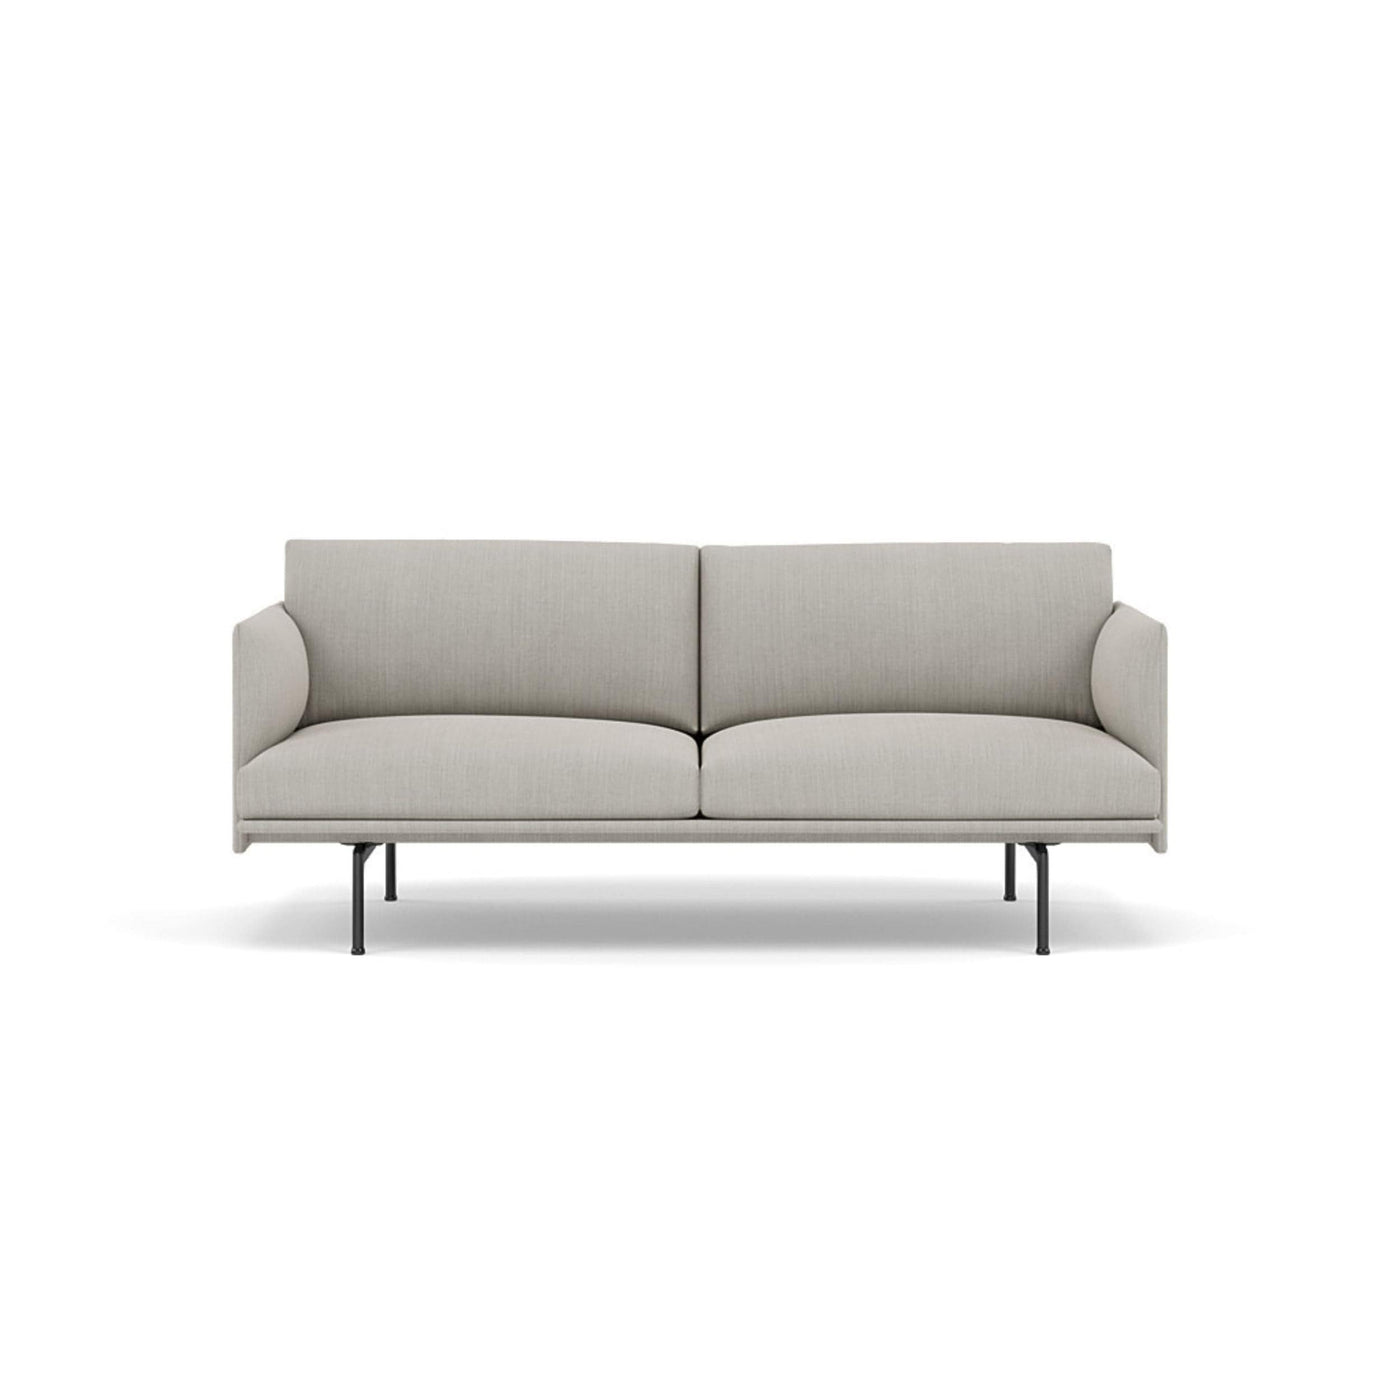 Muuto Outline Studio Sofa 170 black legs. Made to order from someday designs. #colour_fiord-201